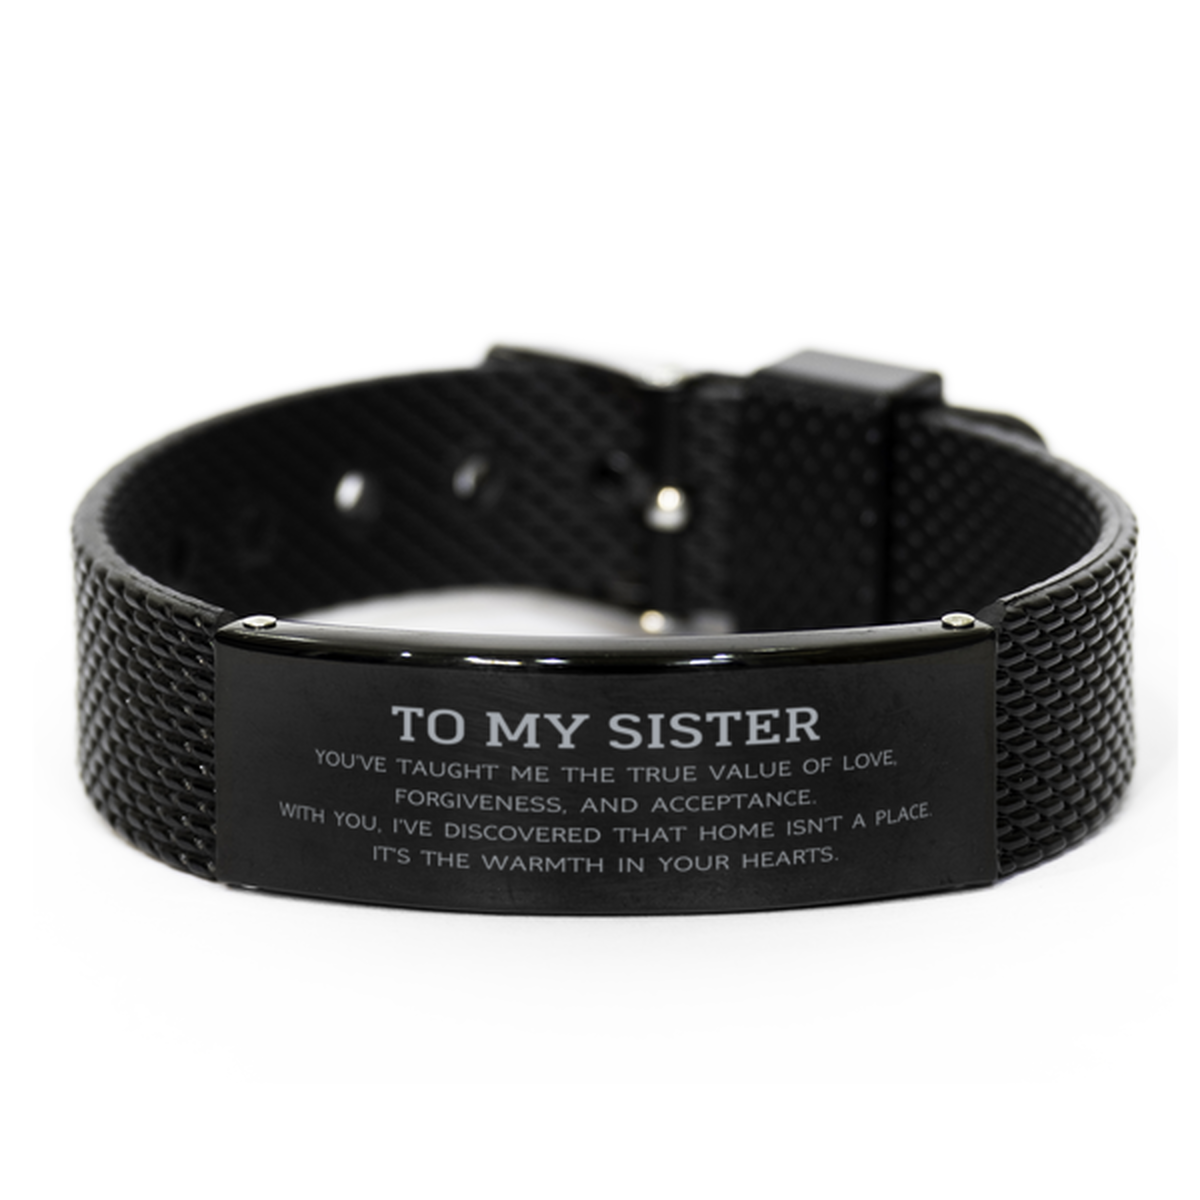 To My Sister Gifts, You've taught me the true value of love, Thank You Gifts For Sister, Birthday Black Shark Mesh Bracelet For Sister